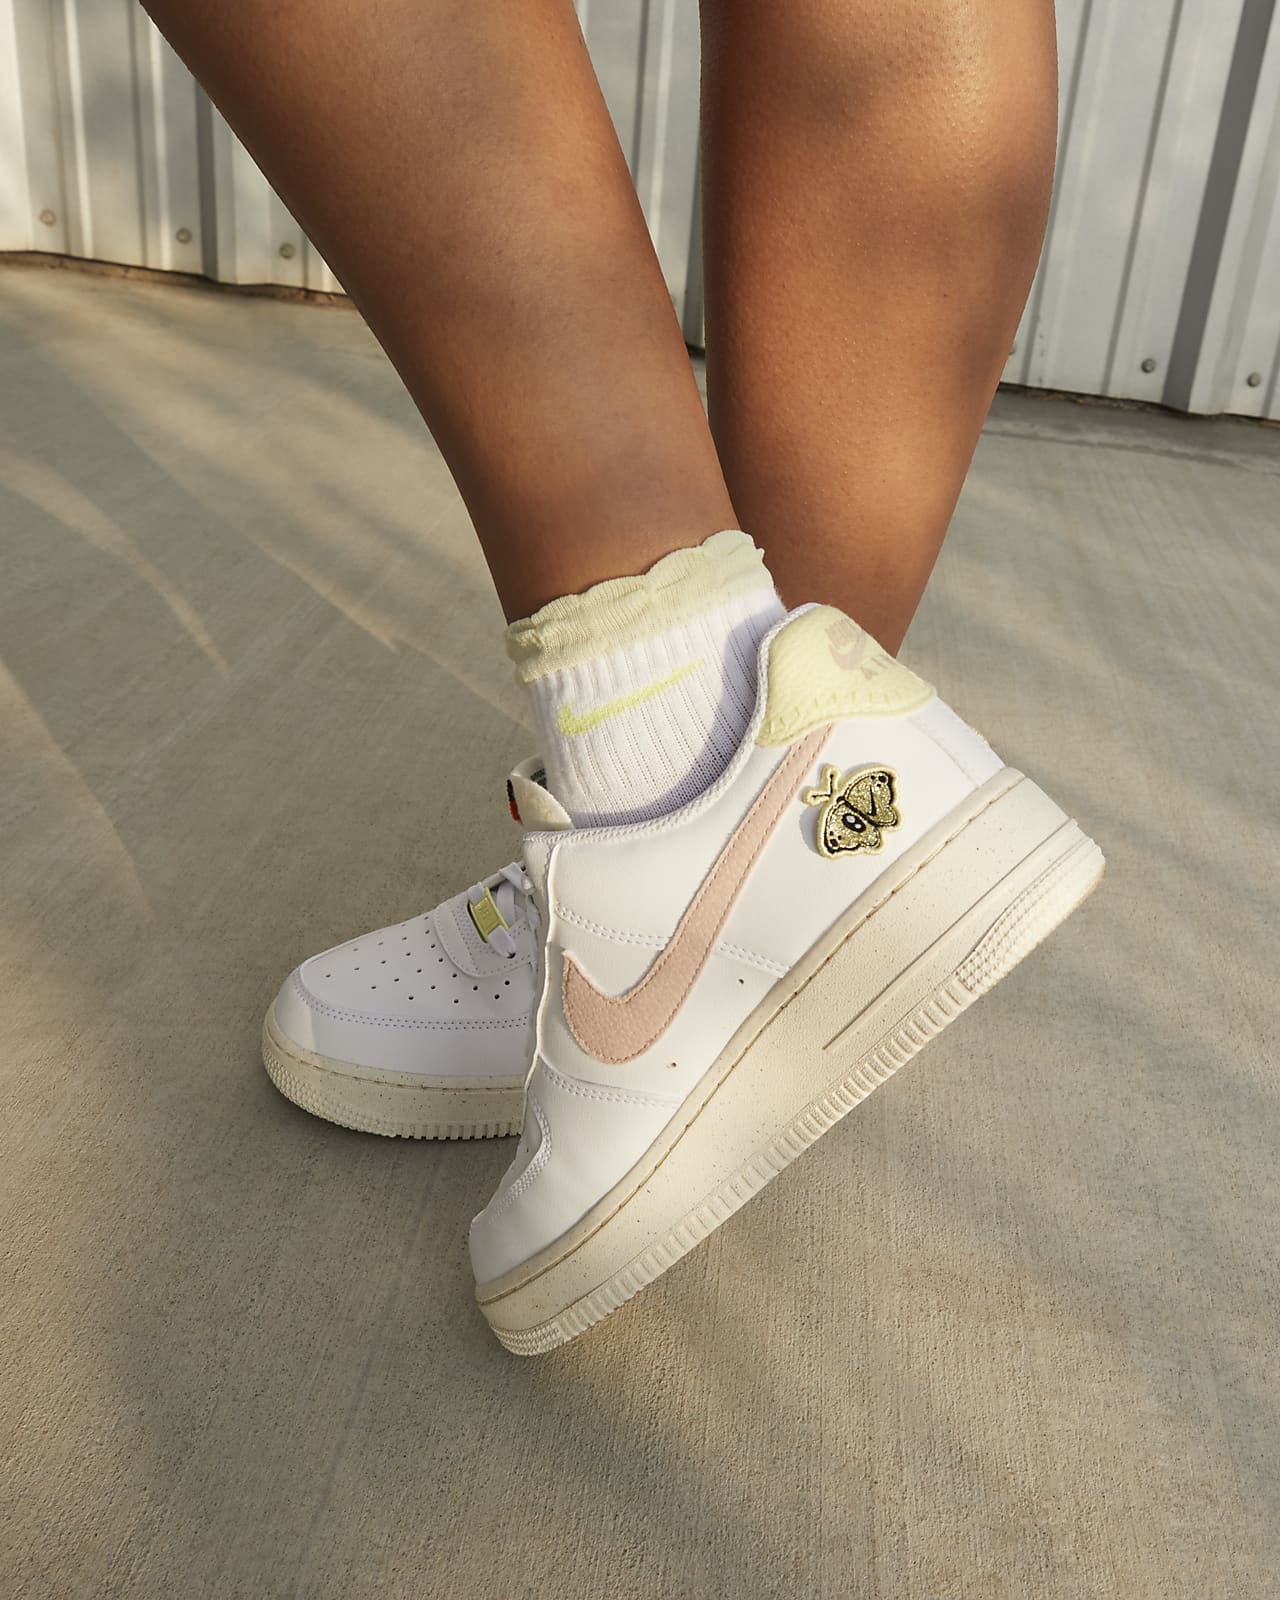 Nike Air Force 1 SE Women's Shoes. Nike IN